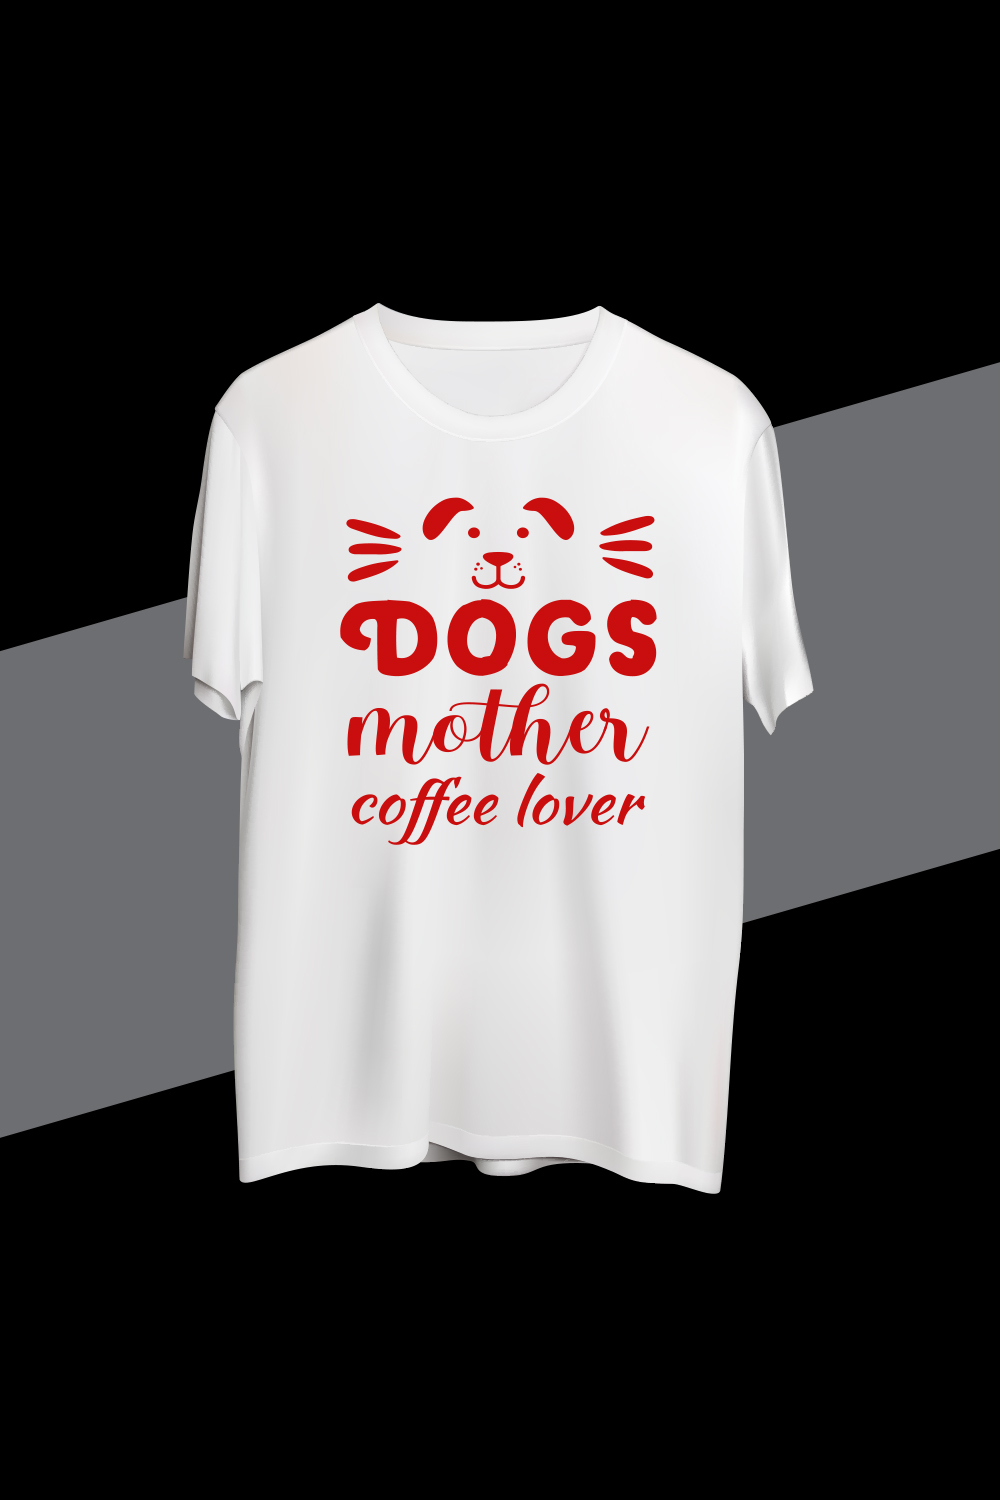 T - shirt that says dogs mother coffee lover.